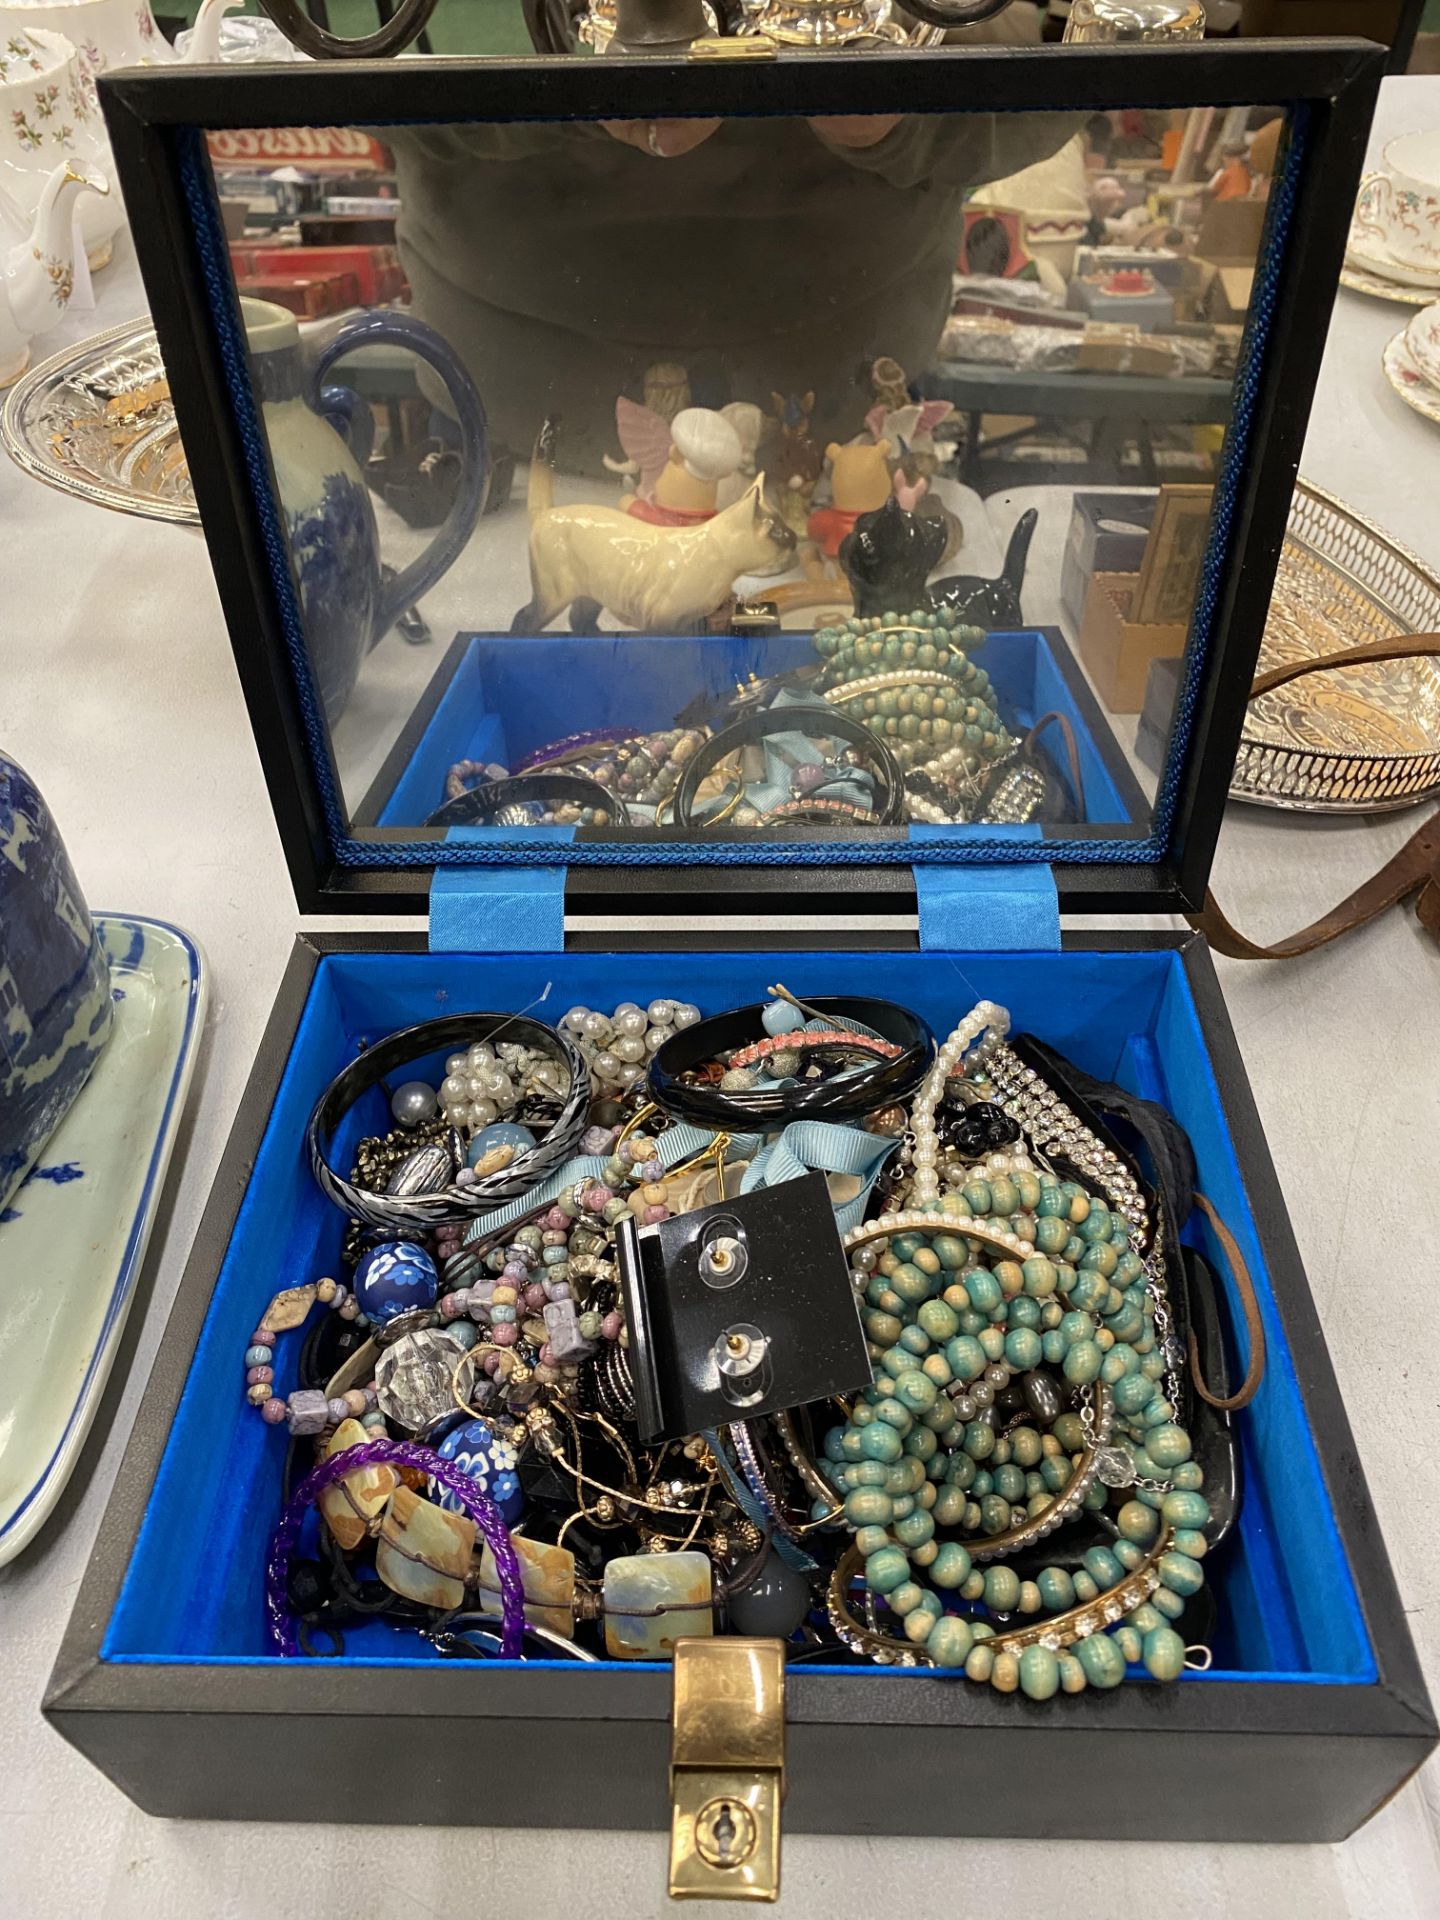 A MIRRORED JEWELLERY BOX WITH CONTENTS INCLUDING BANGLES, BEADS, NECKLACES, EARRINGS, ETC - Image 4 of 6